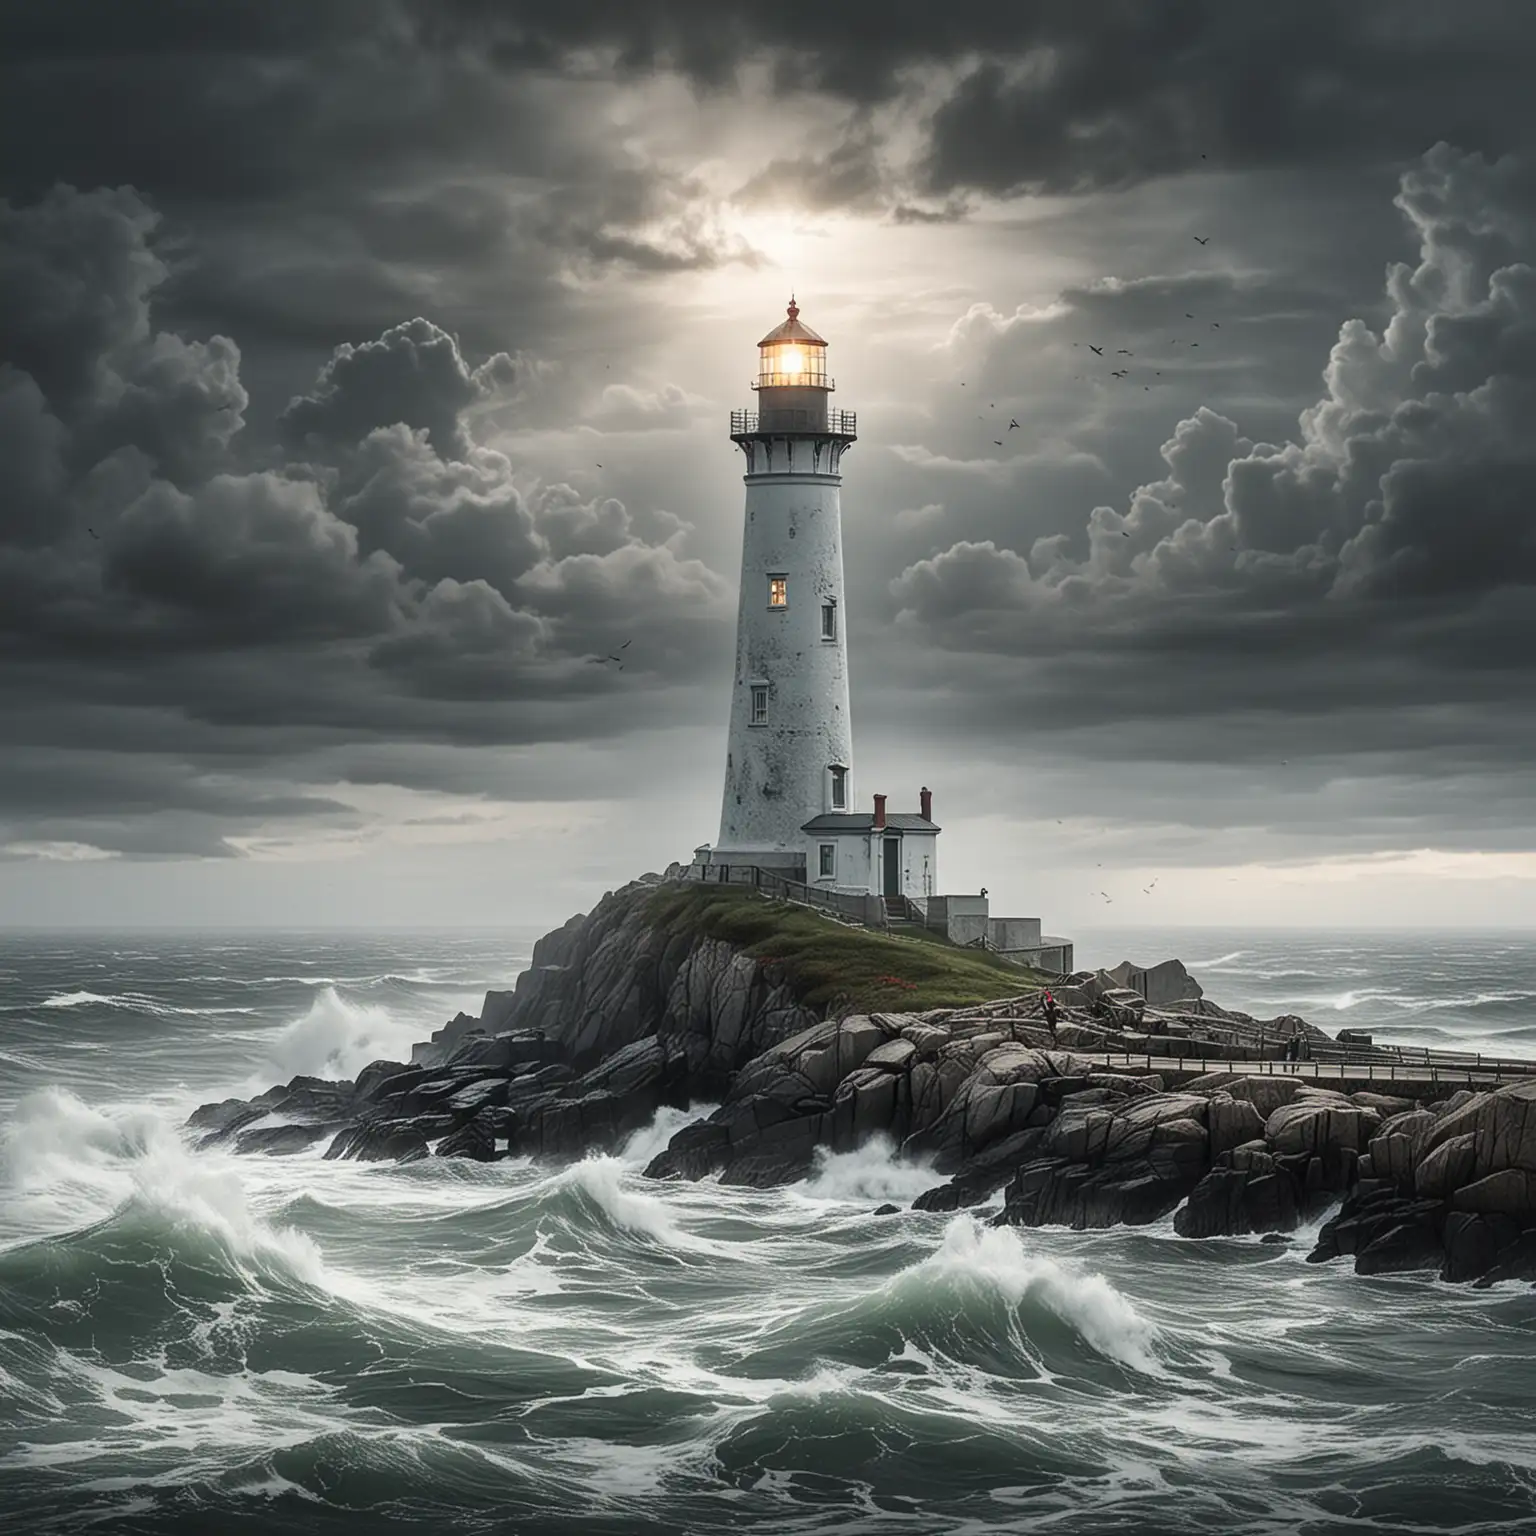 Lighthouse-Piercing-Through-Mist-Symbol-of-Strength-and-Resilience